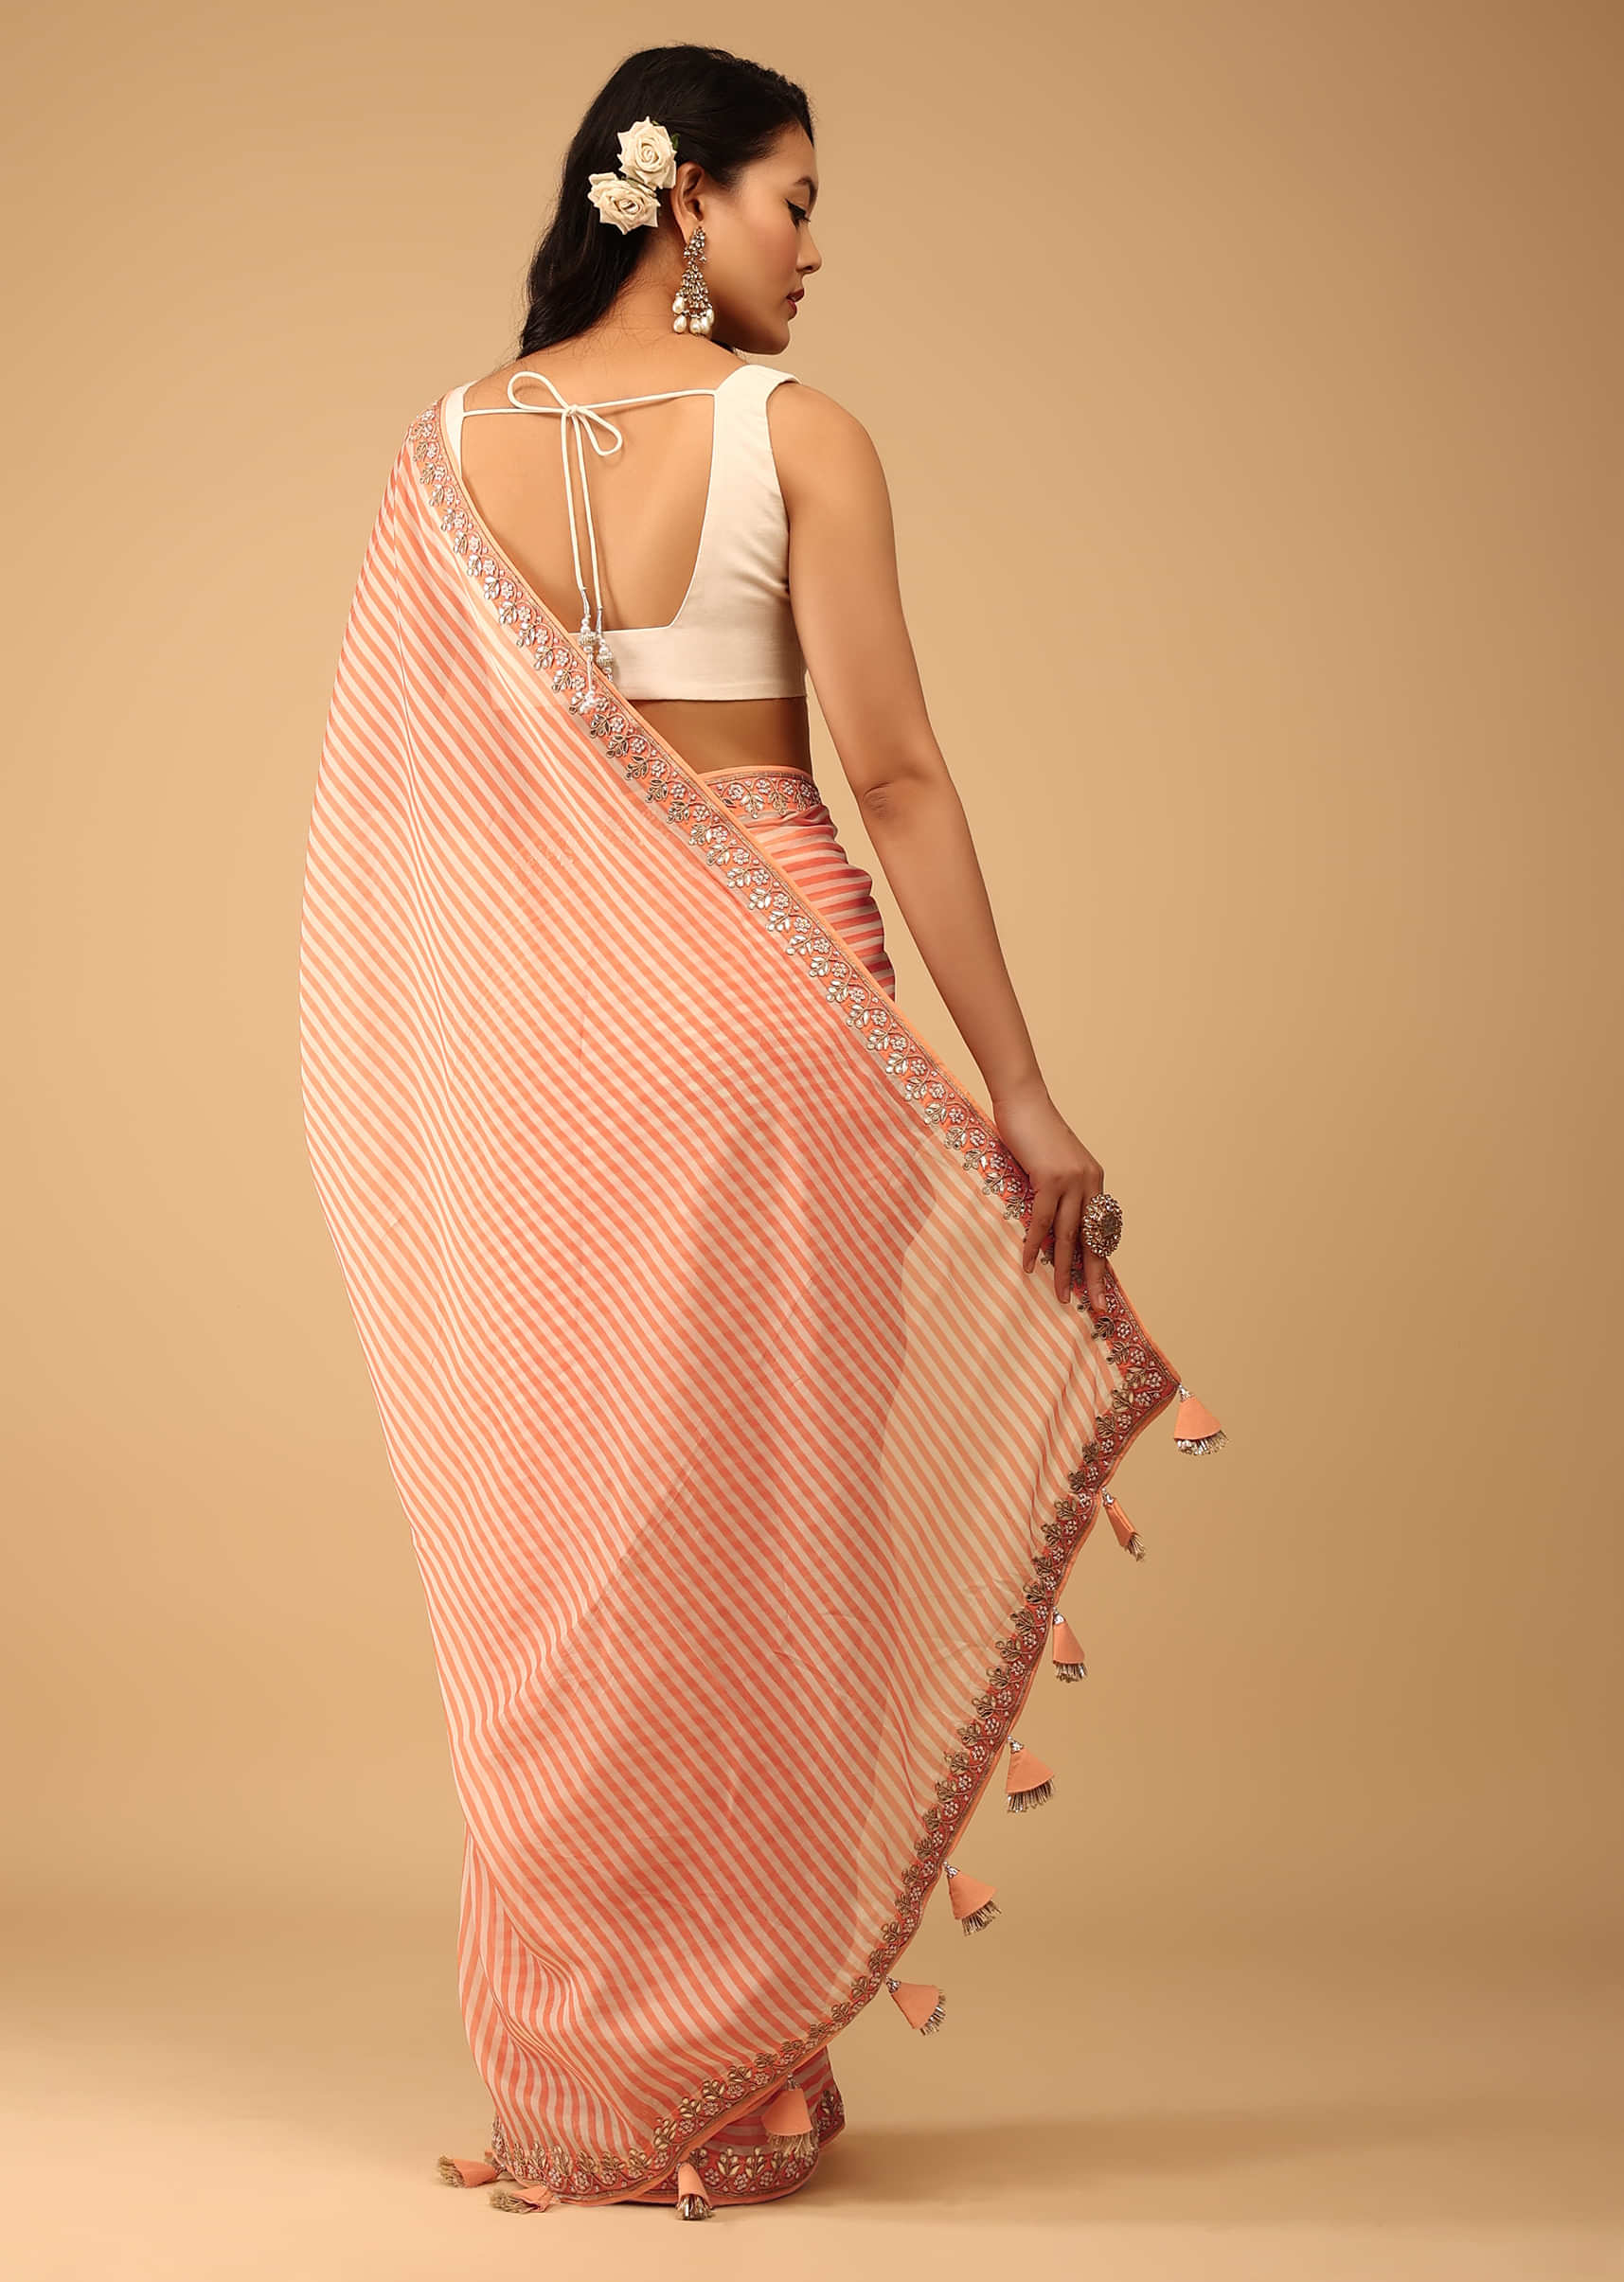 Melon Orange Saree In Muslin With Stripe Print And Embroidery